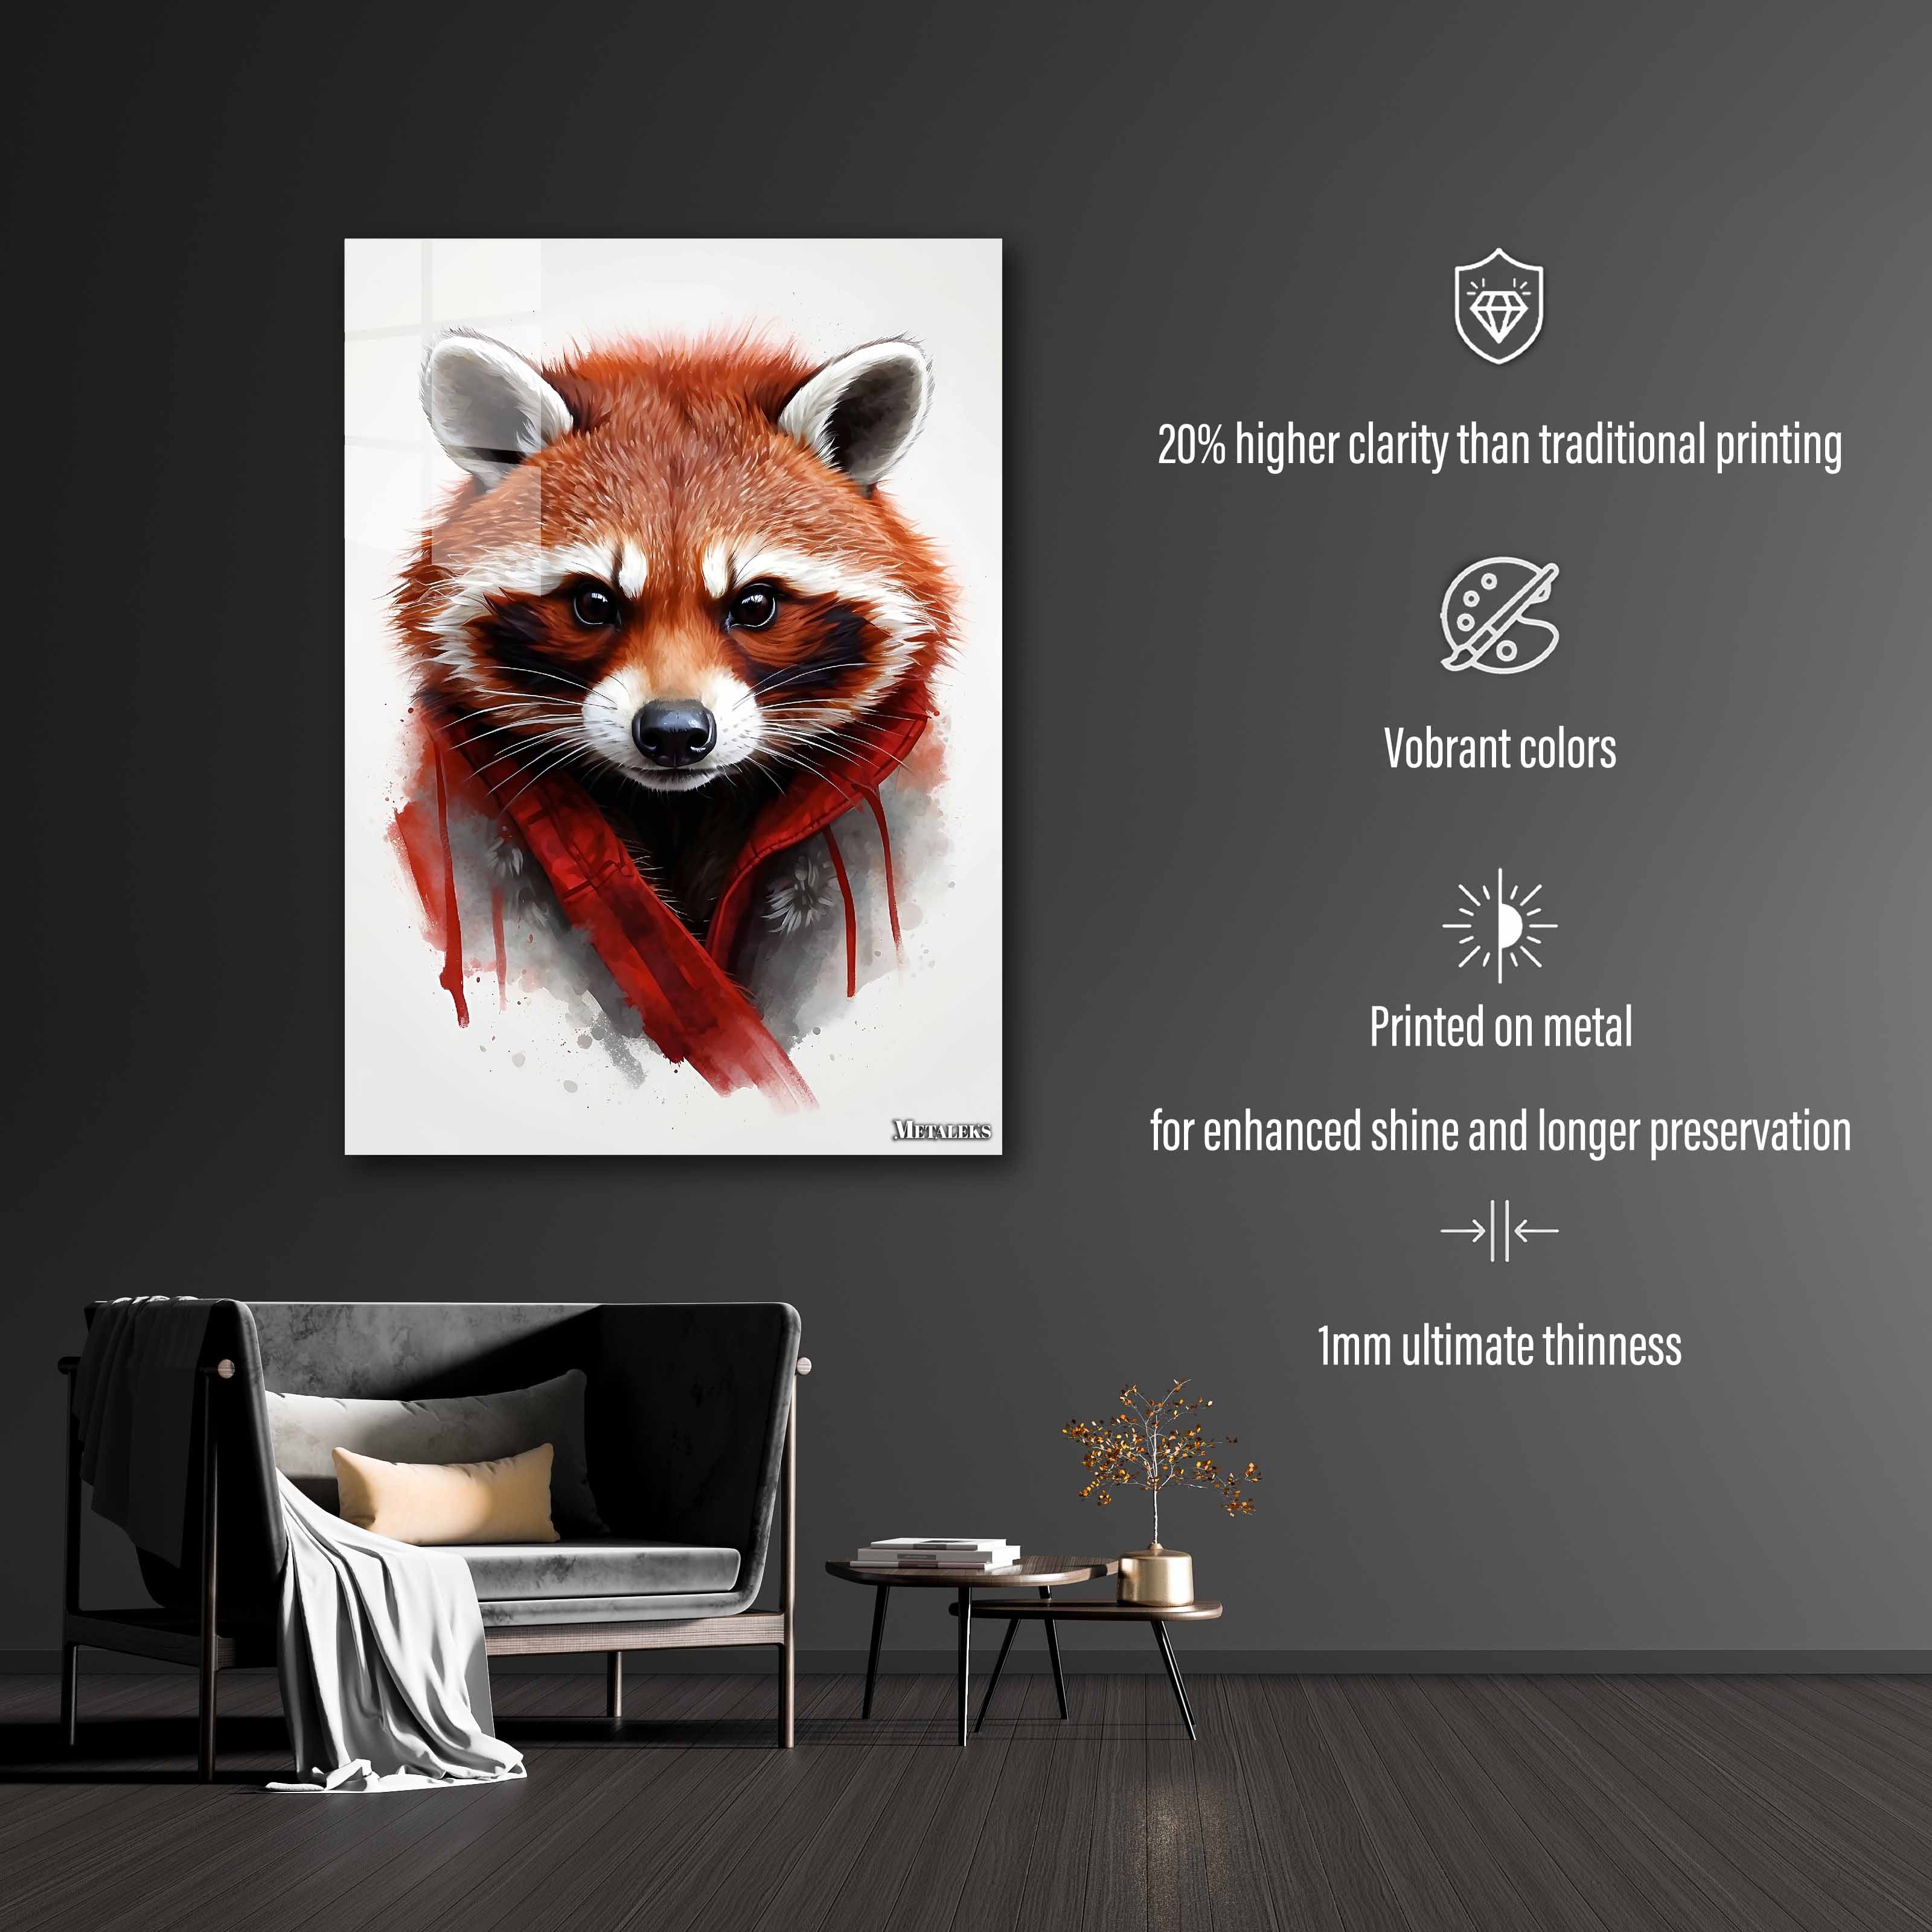 Crimson Mask: The Radiant Gaze of the Red Raccoon-designed by @maximise